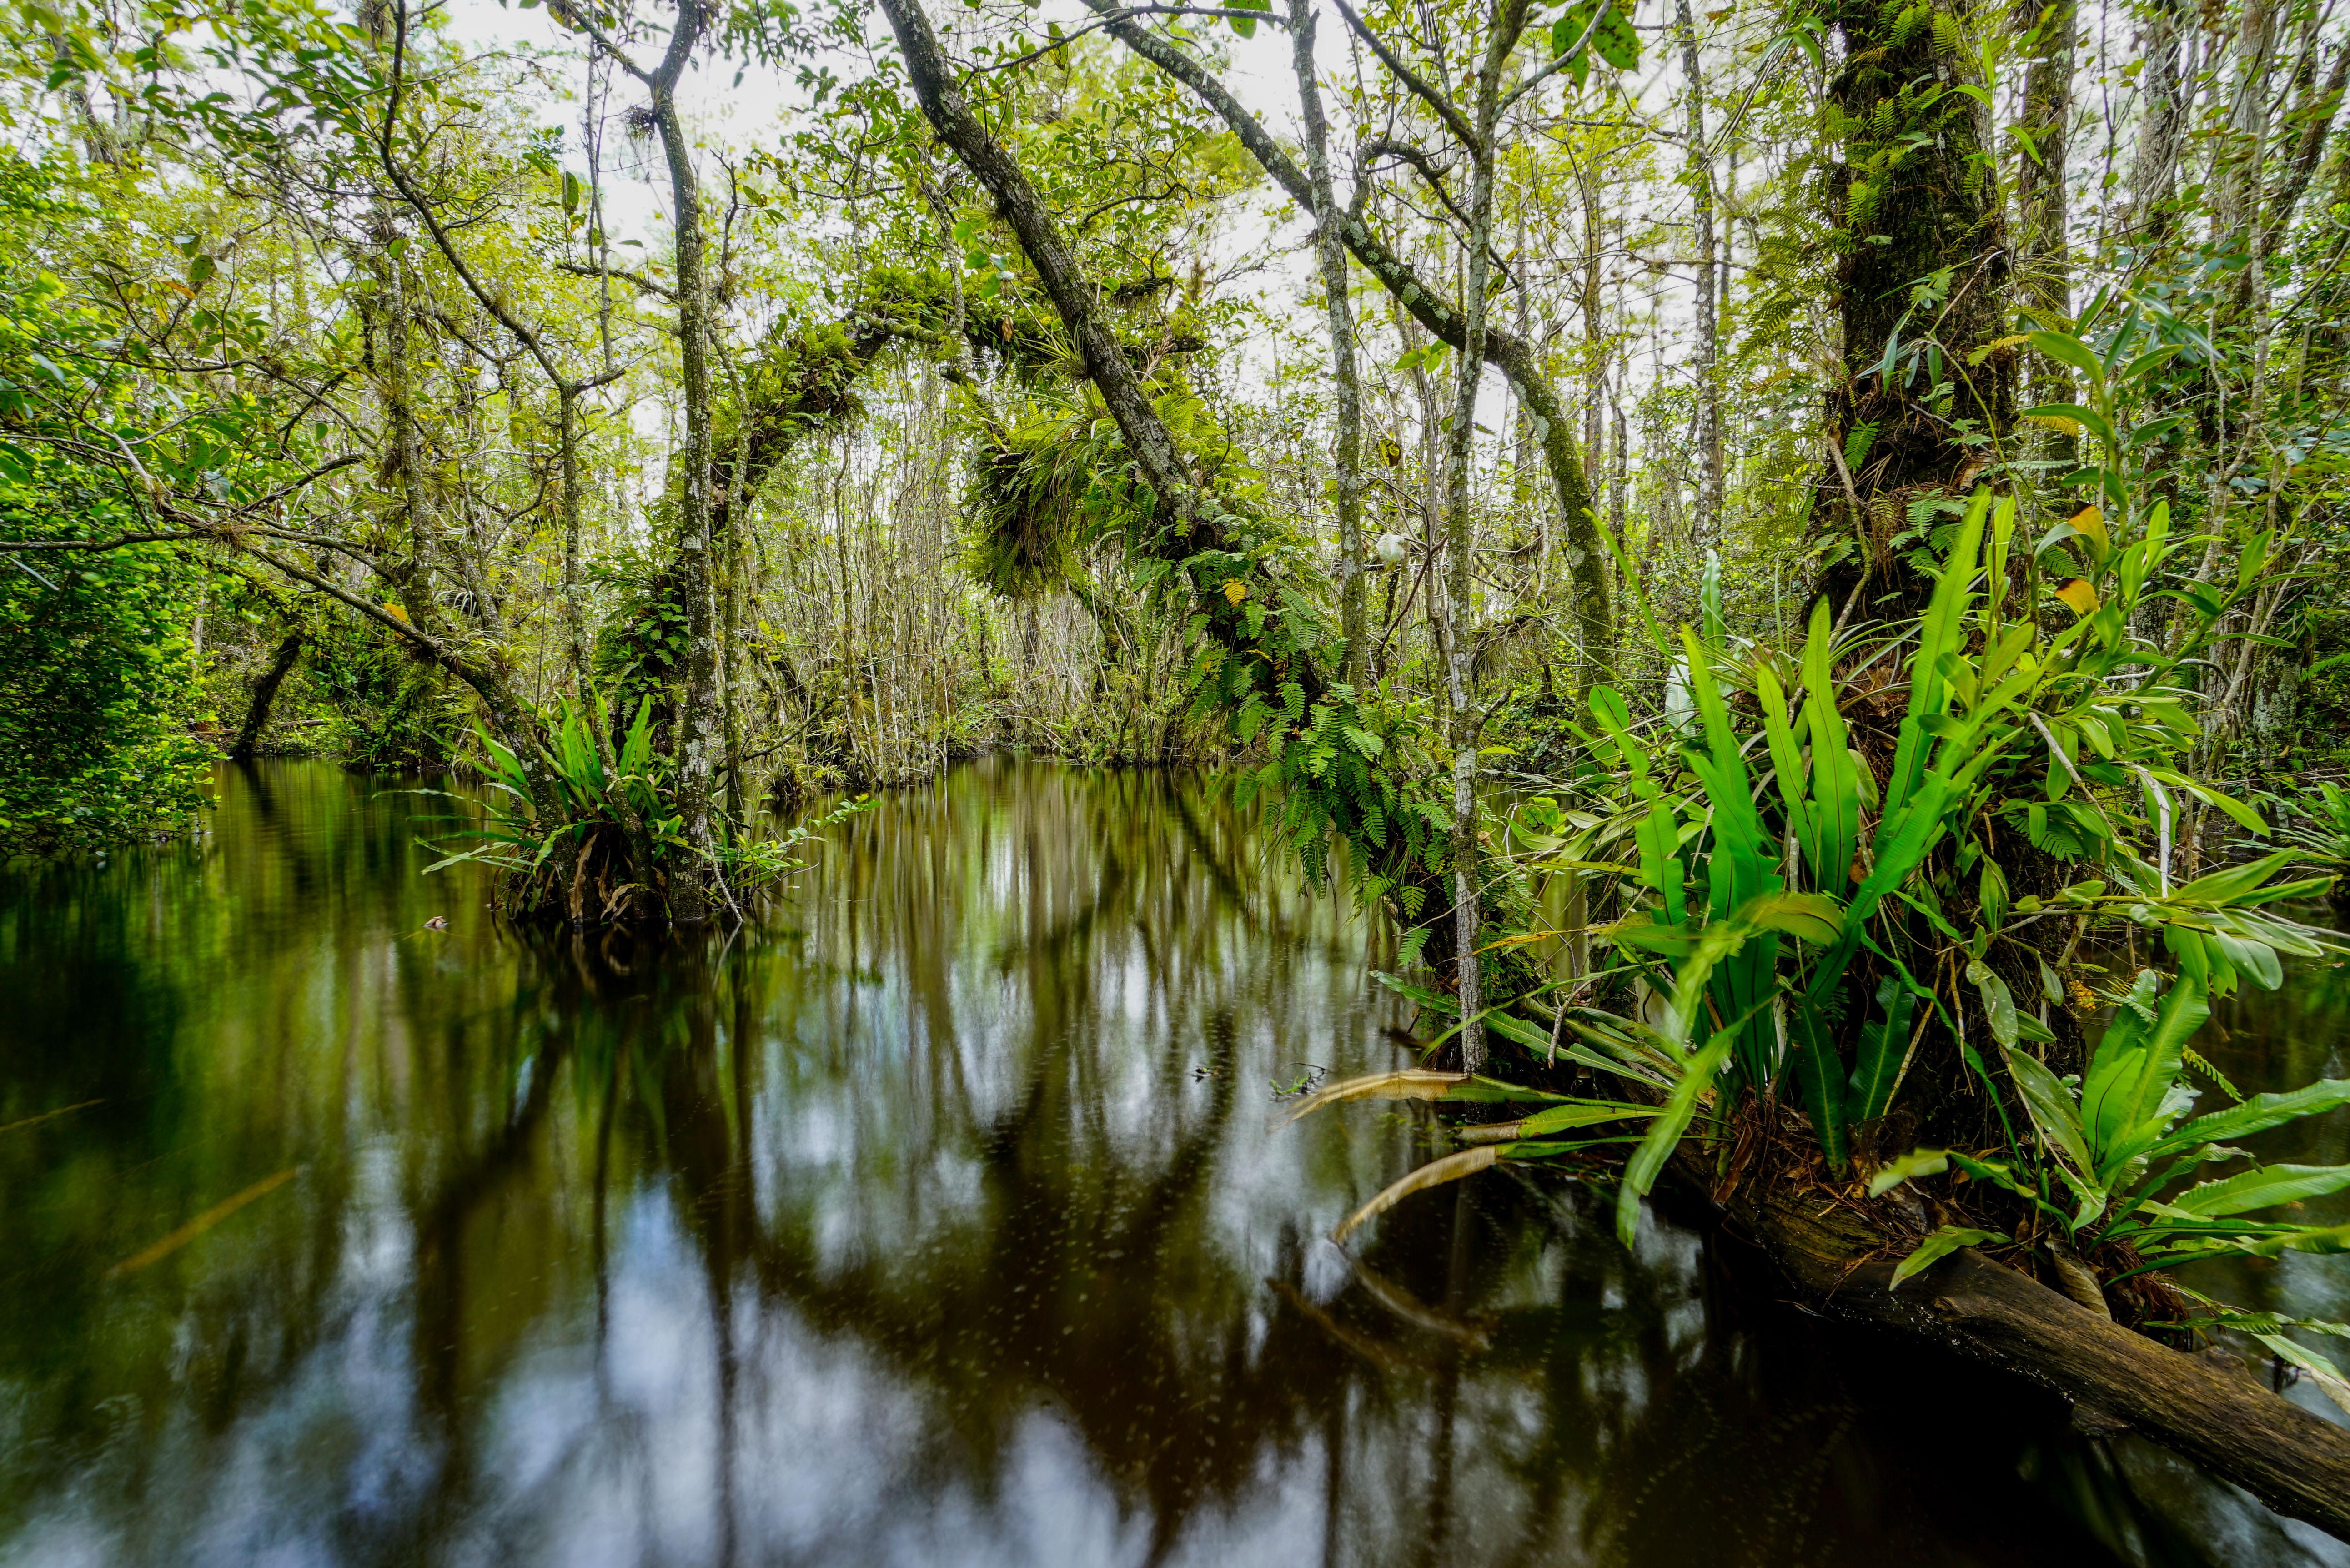 A water filled swamp filled with lush green ferns and trees.